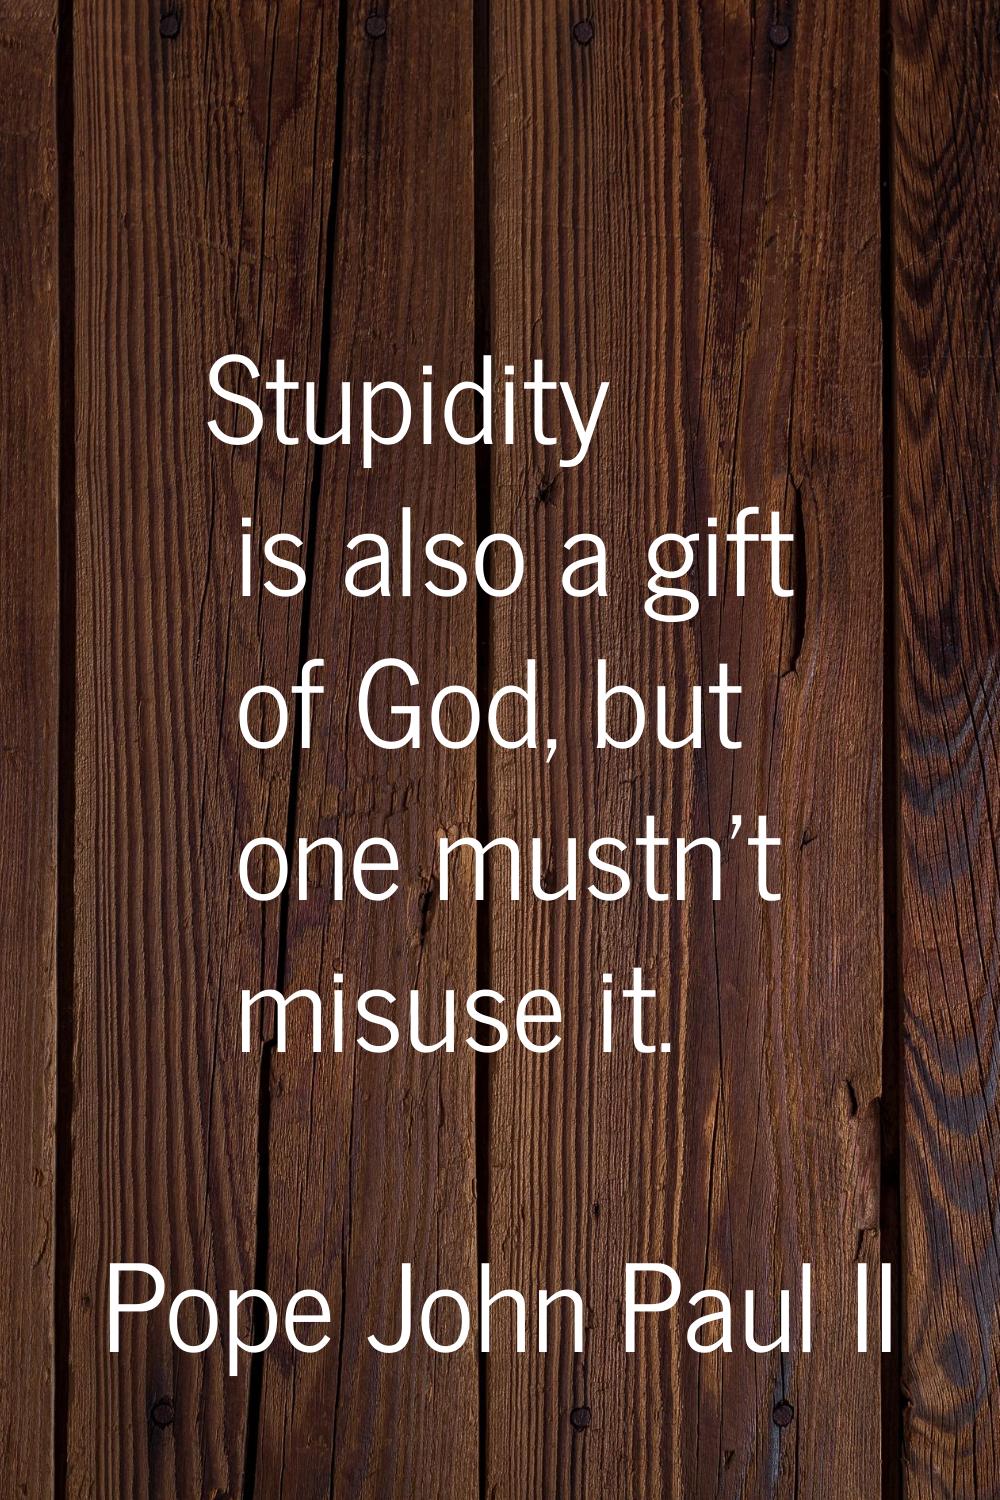 Stupidity is also a gift of God, but one mustn't misuse it.